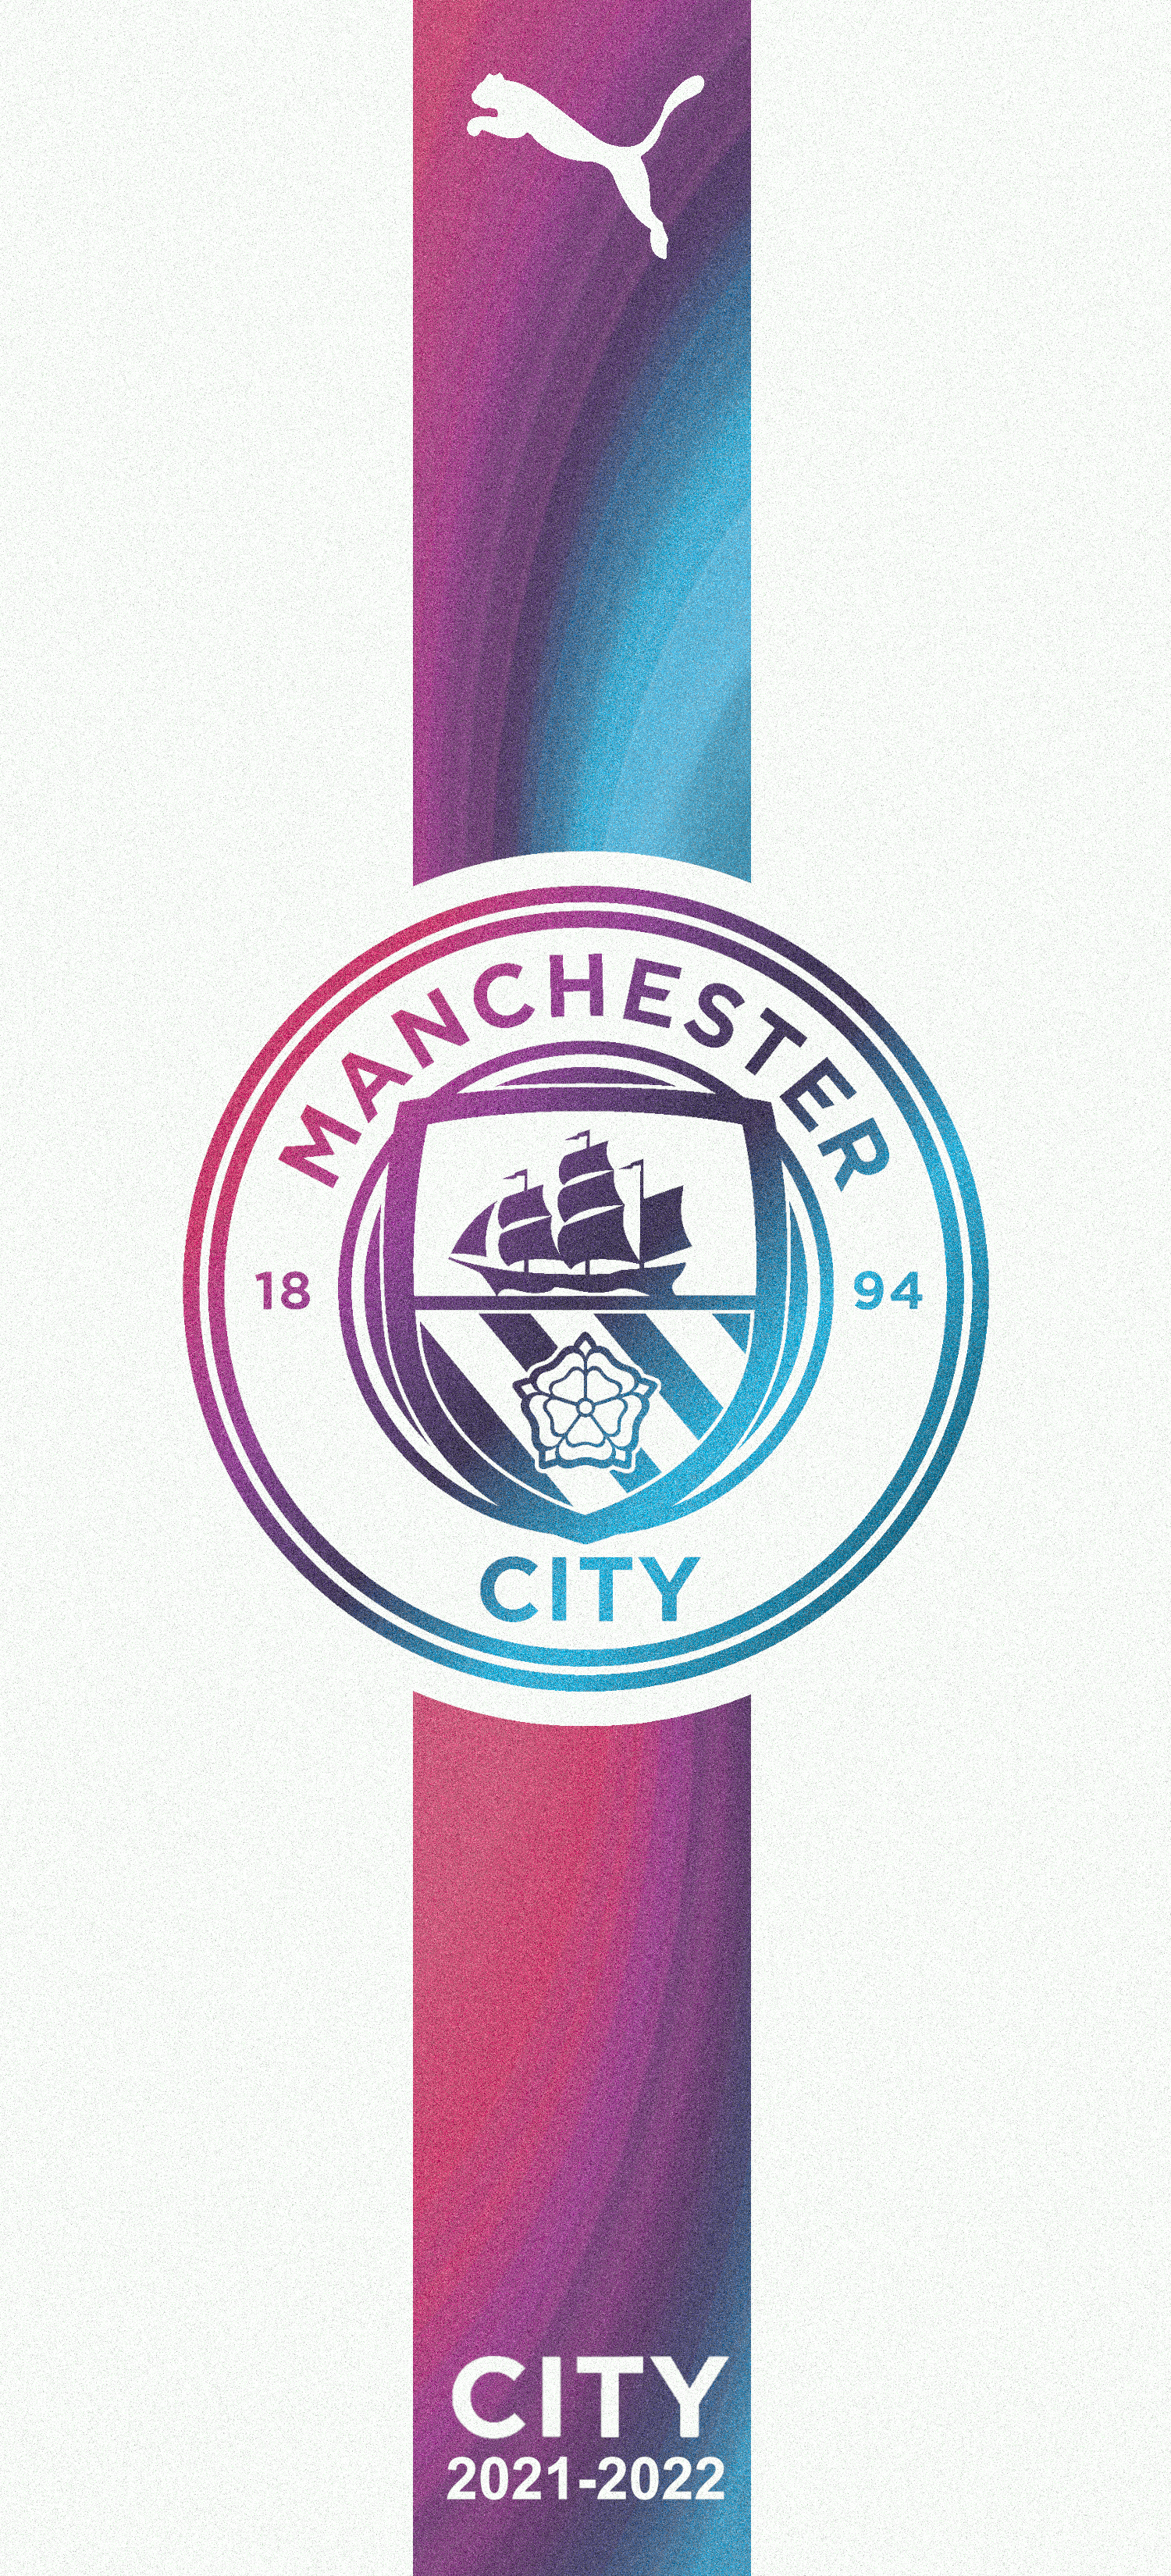 I made a wallpaper from the new away kit: MCFC